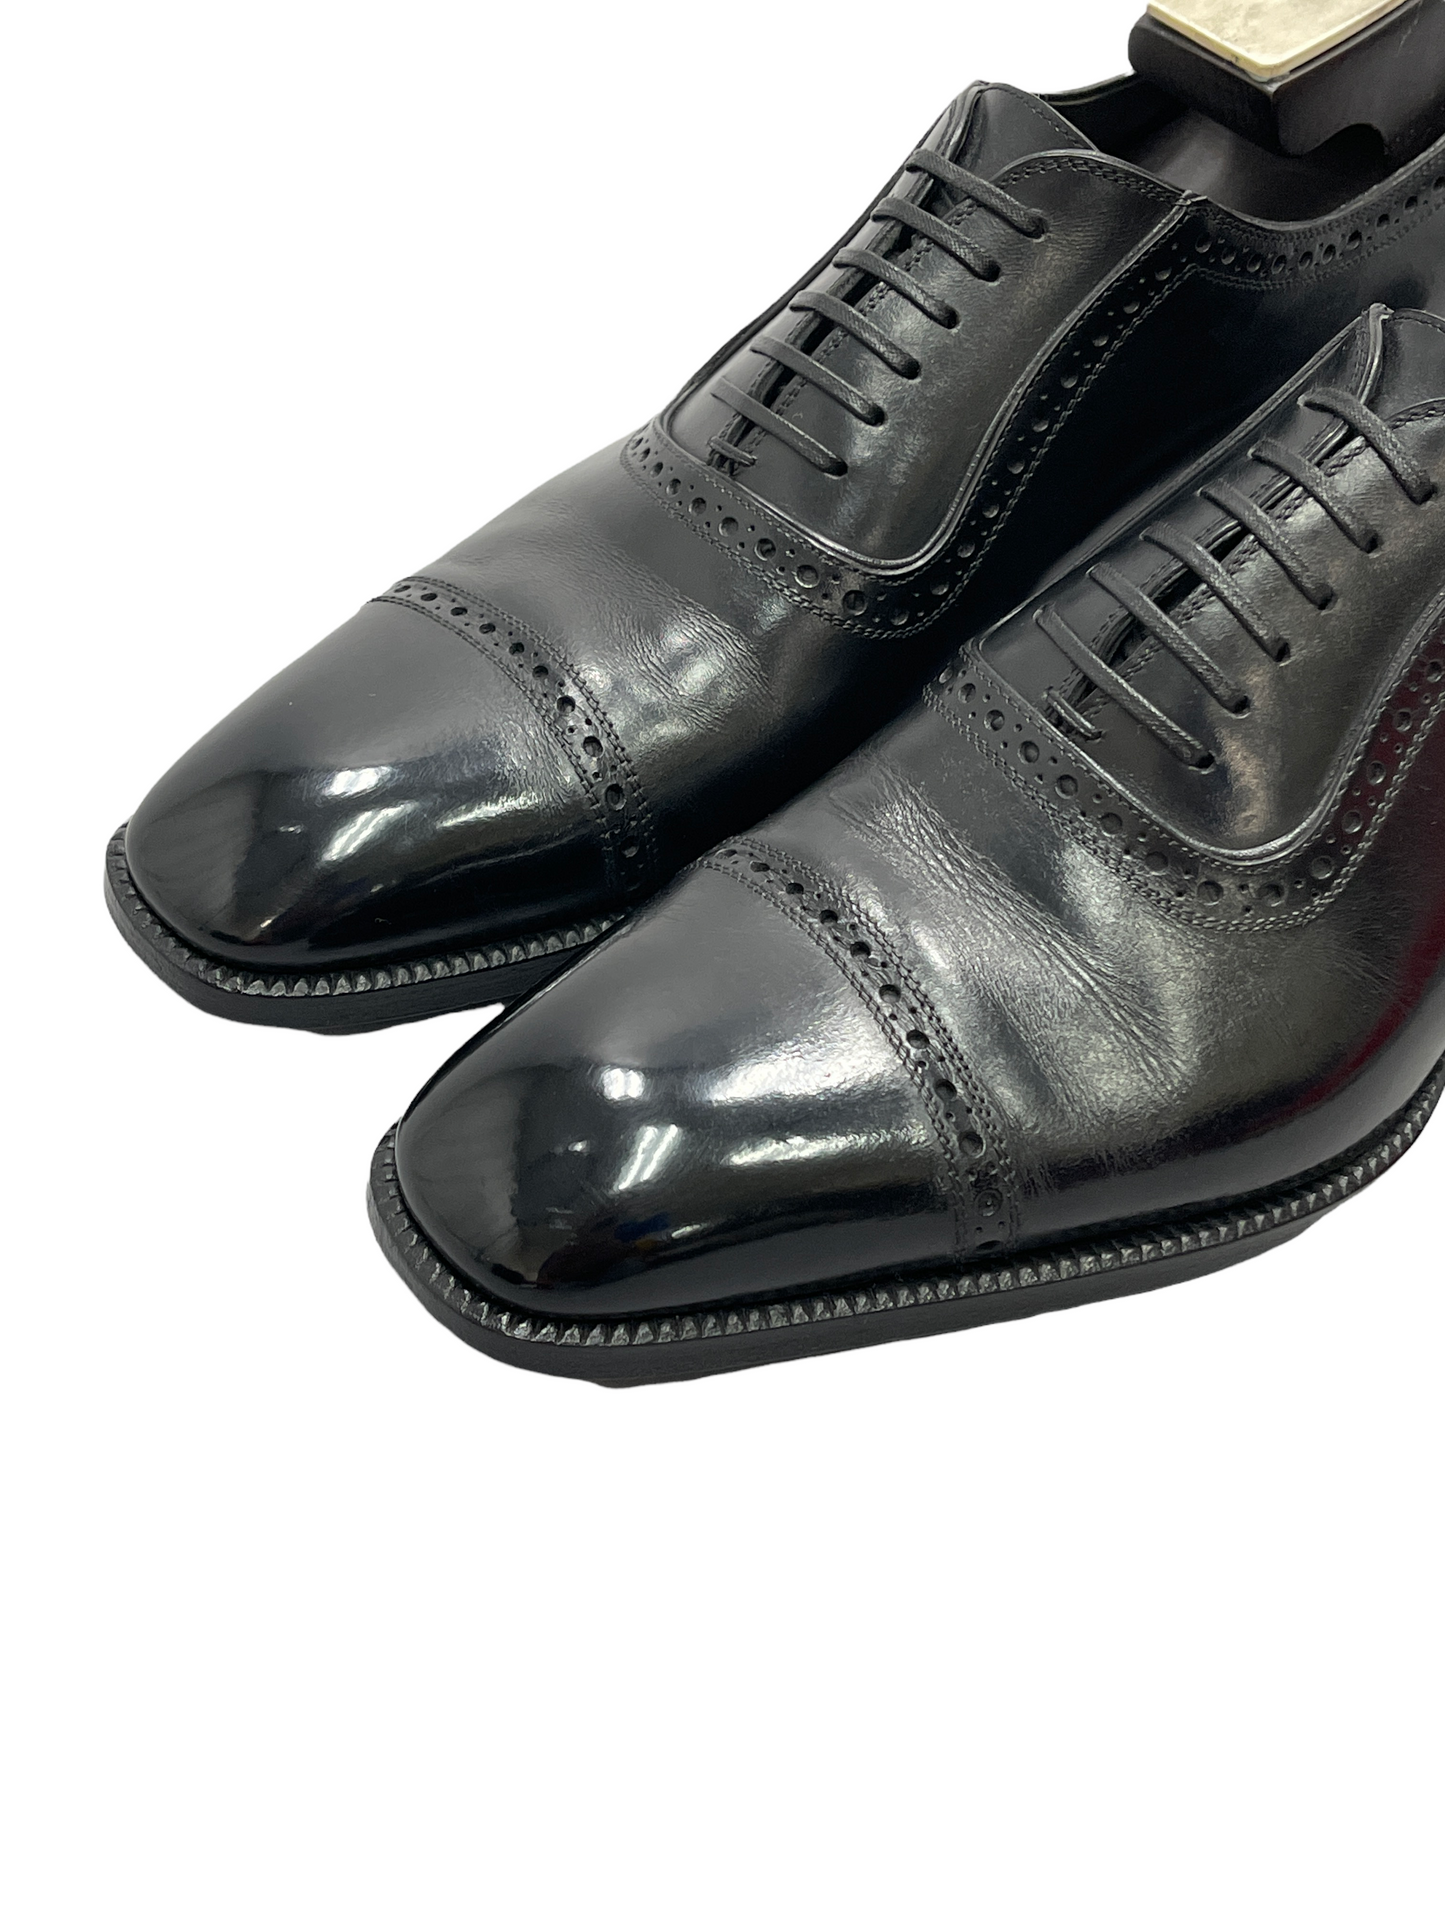 Tom Ford Black Leather Oxford Dress Shoe 8.5 D US — Genuine Design luxury consignment Calgary, Canada New & pre-owned clothing, shoes, accessories.